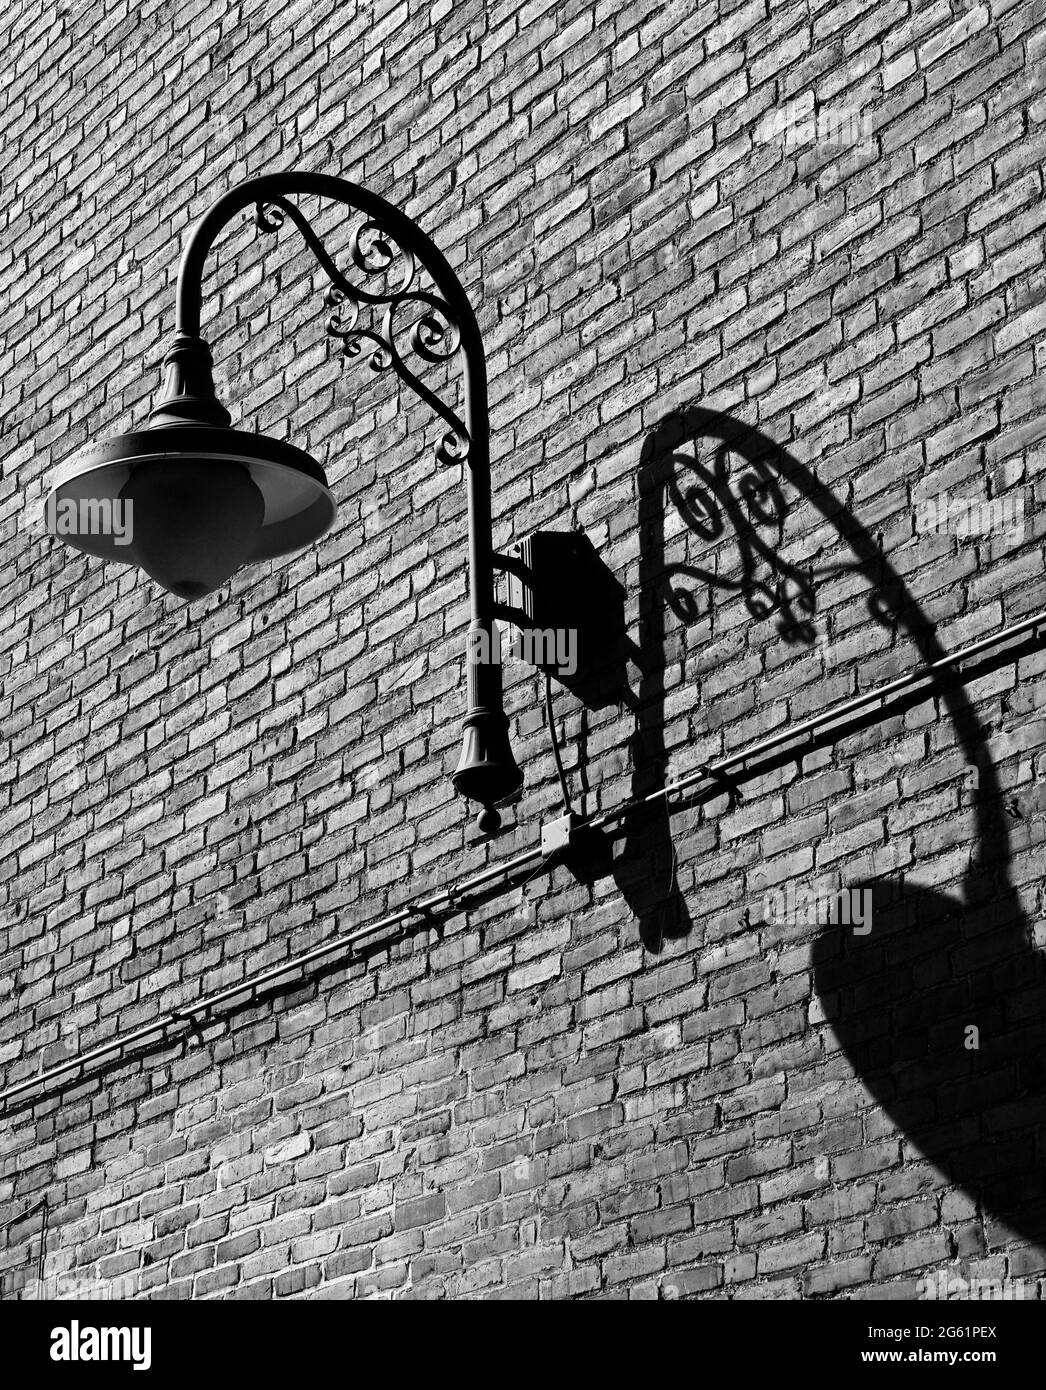 An overhead outdoor lighting fixture and its shadow on a brick wall. Stock Photo